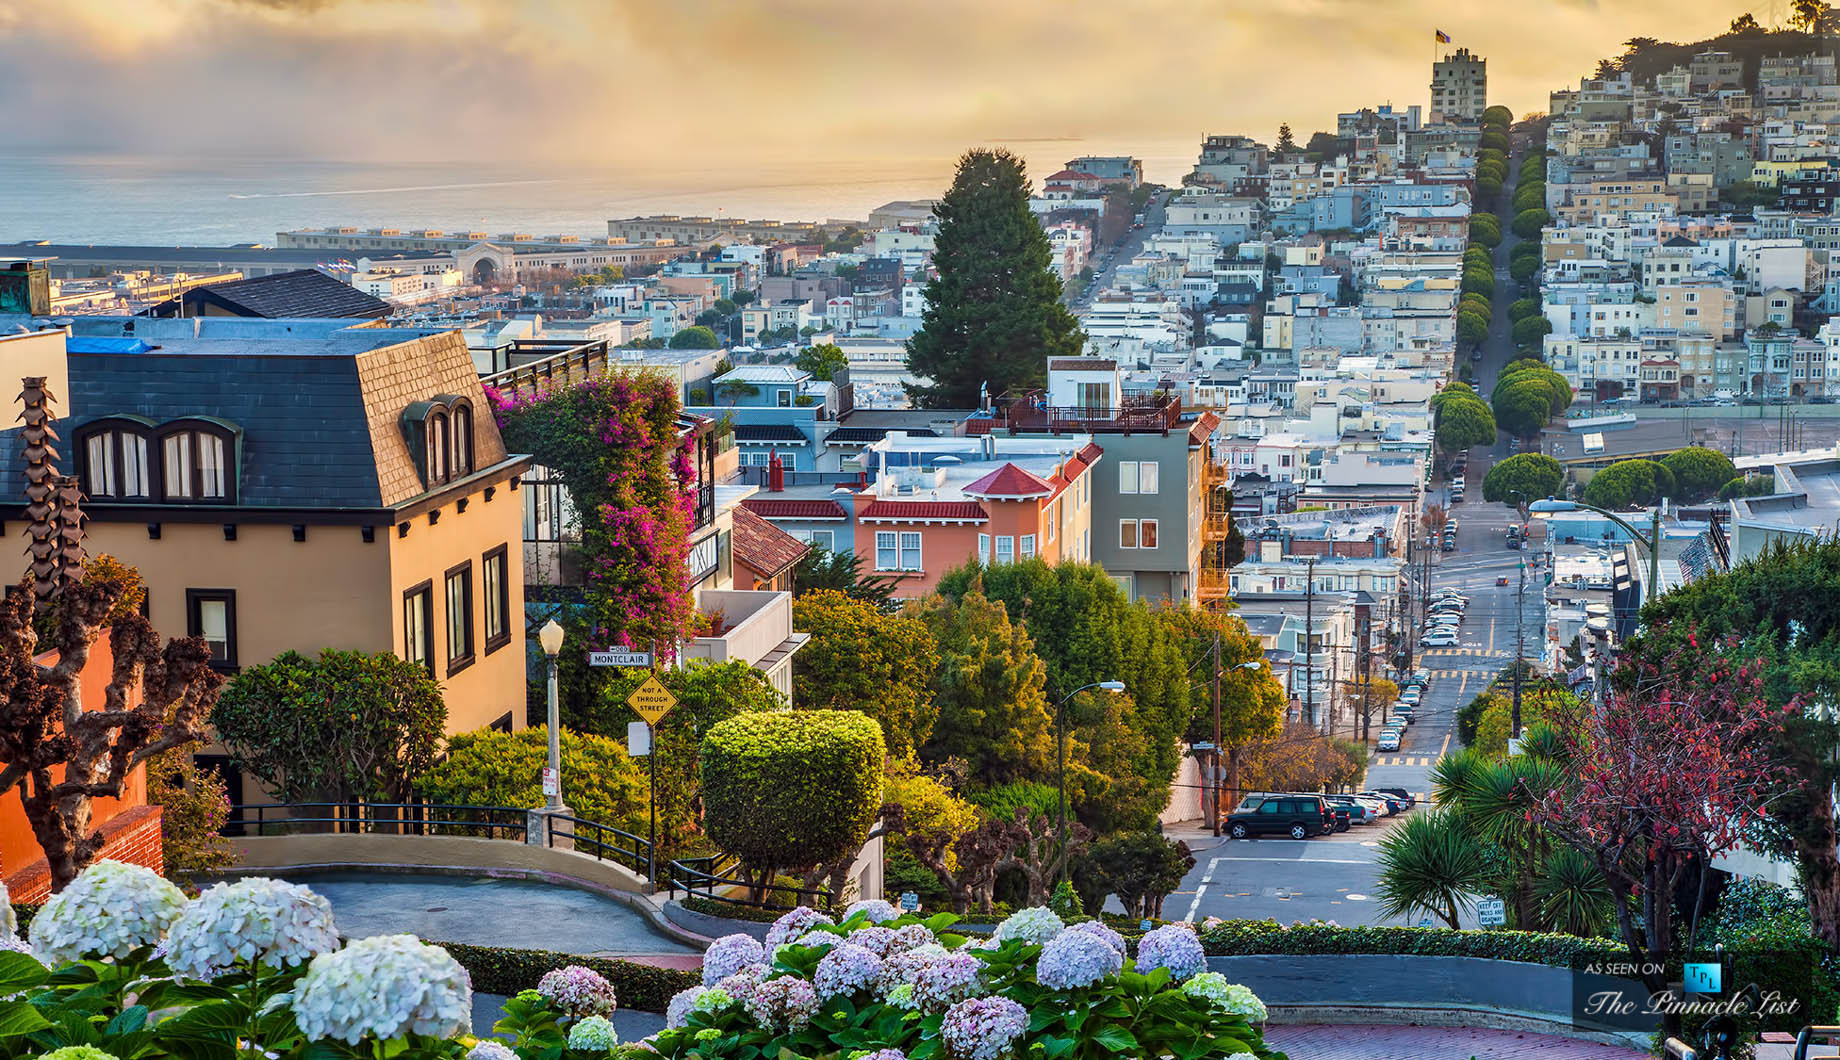 A Great Place to Raise Families – San Francisco One of the Hottest Housing Markets in America